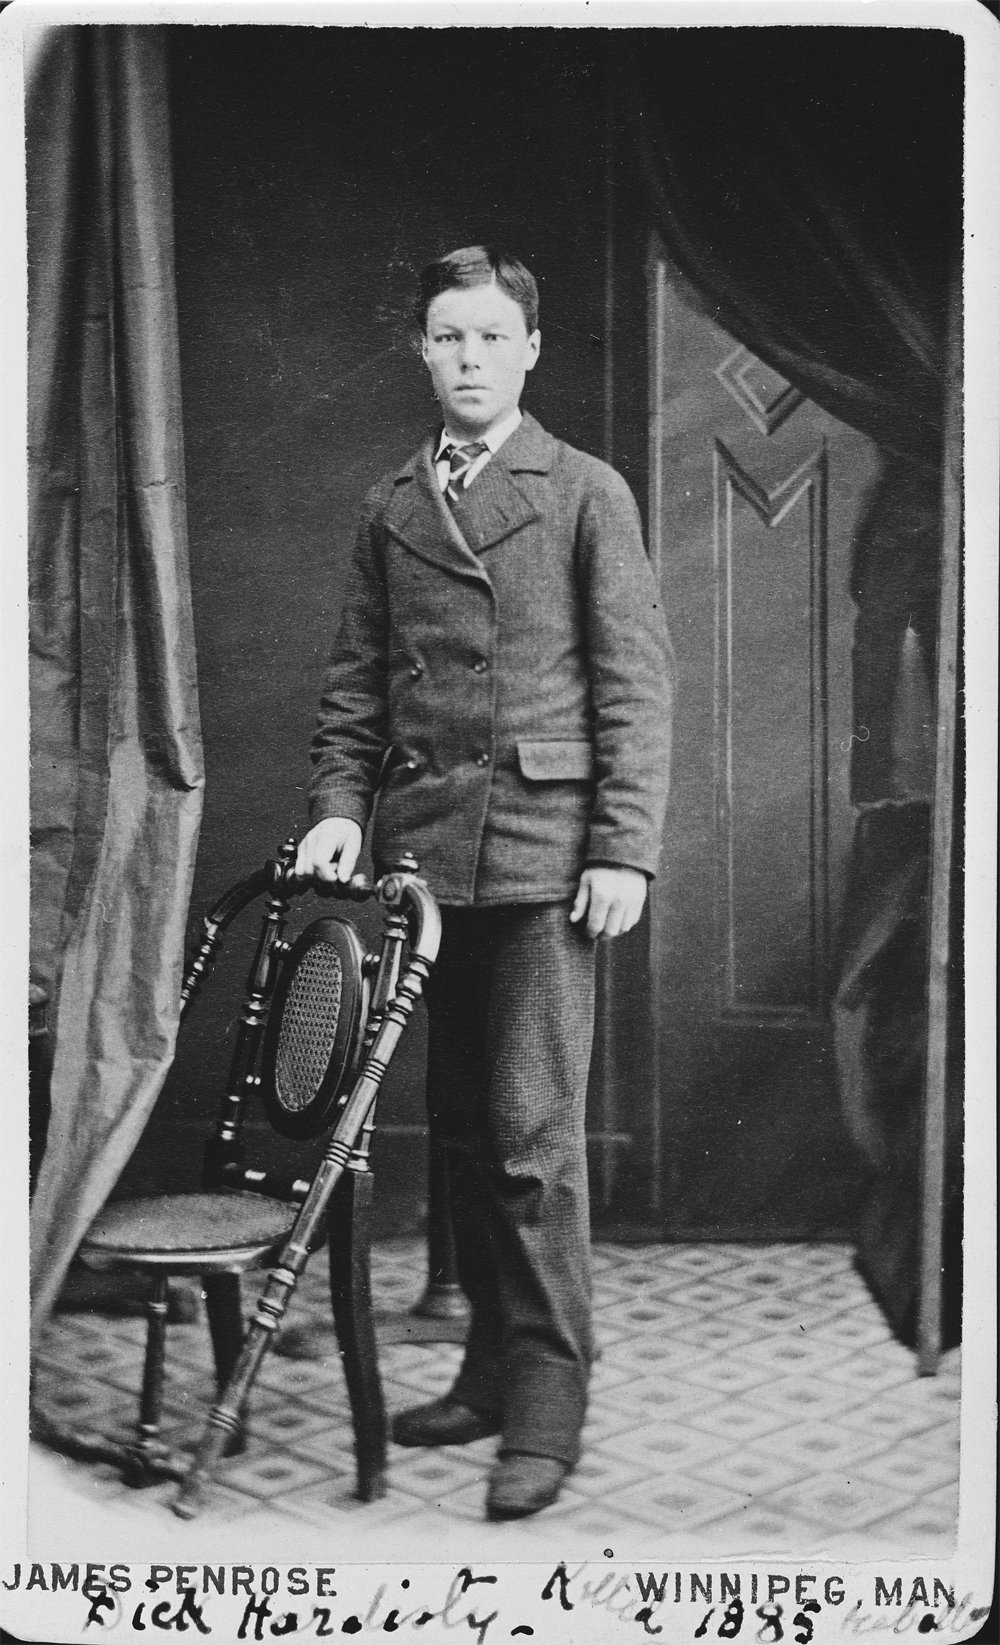 Formal photo of Dick Hardisty as young man in a suit.